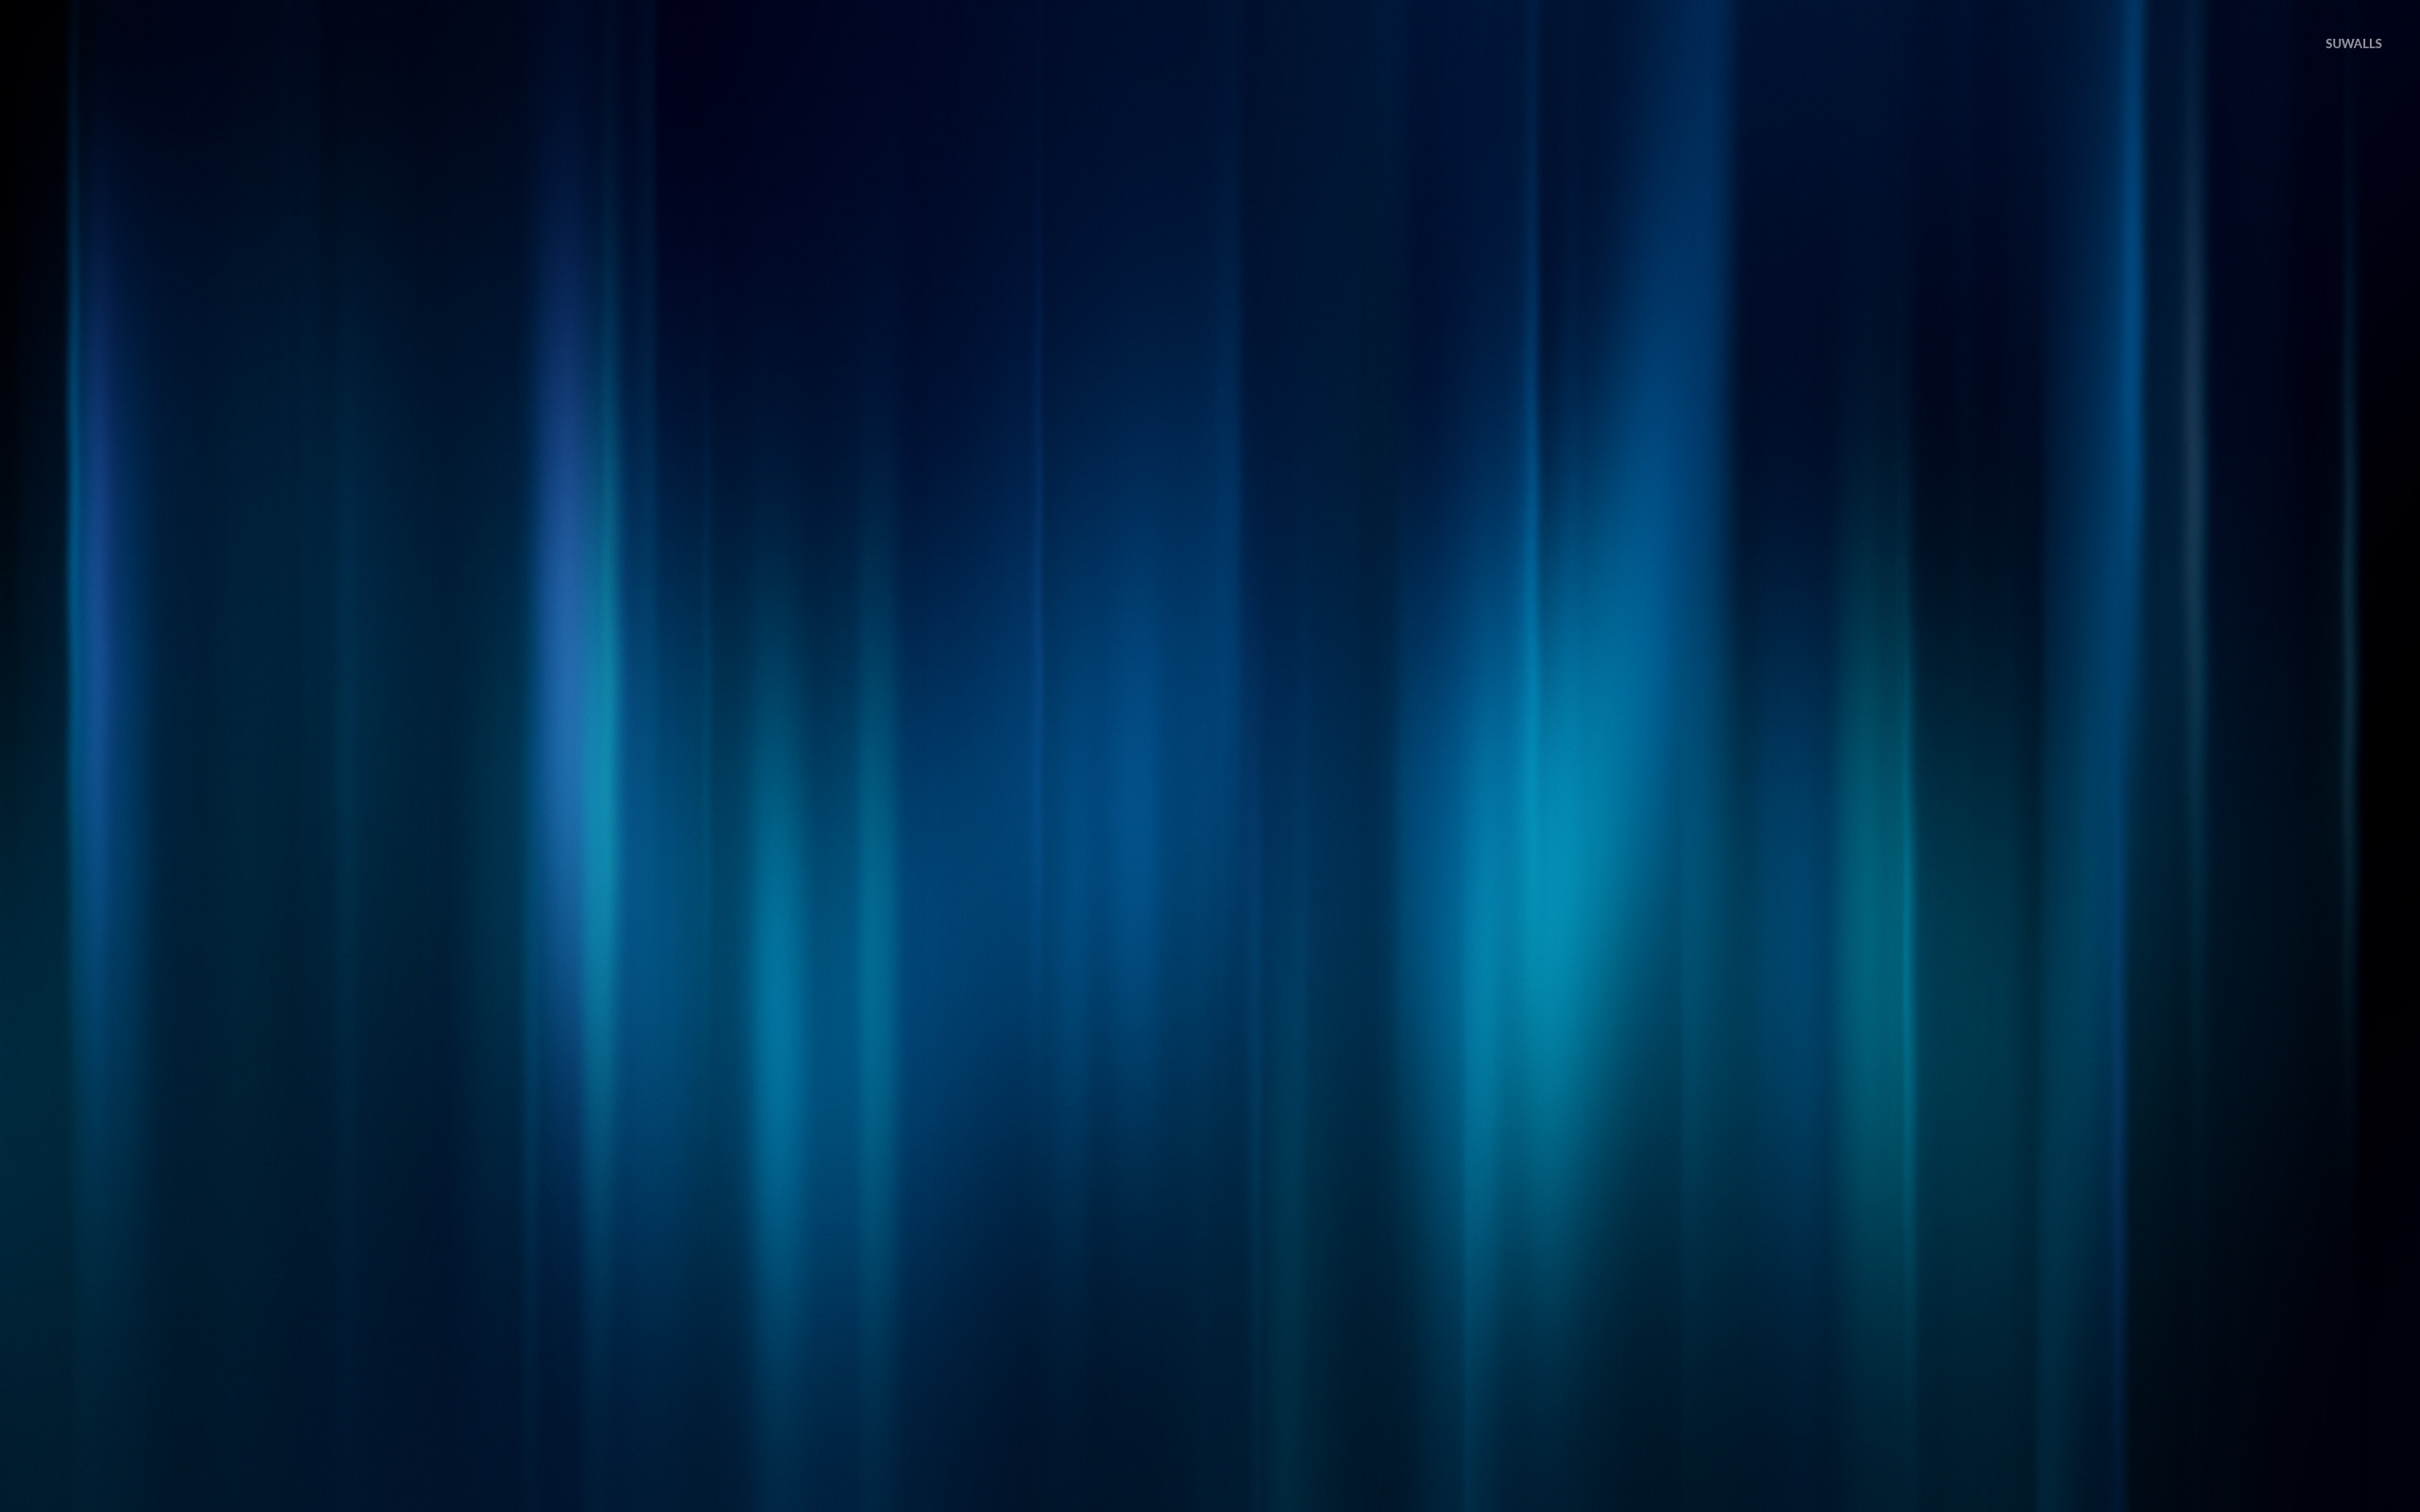 Blue blurry stripes wallpaper - Abstract wallpapers - #43505